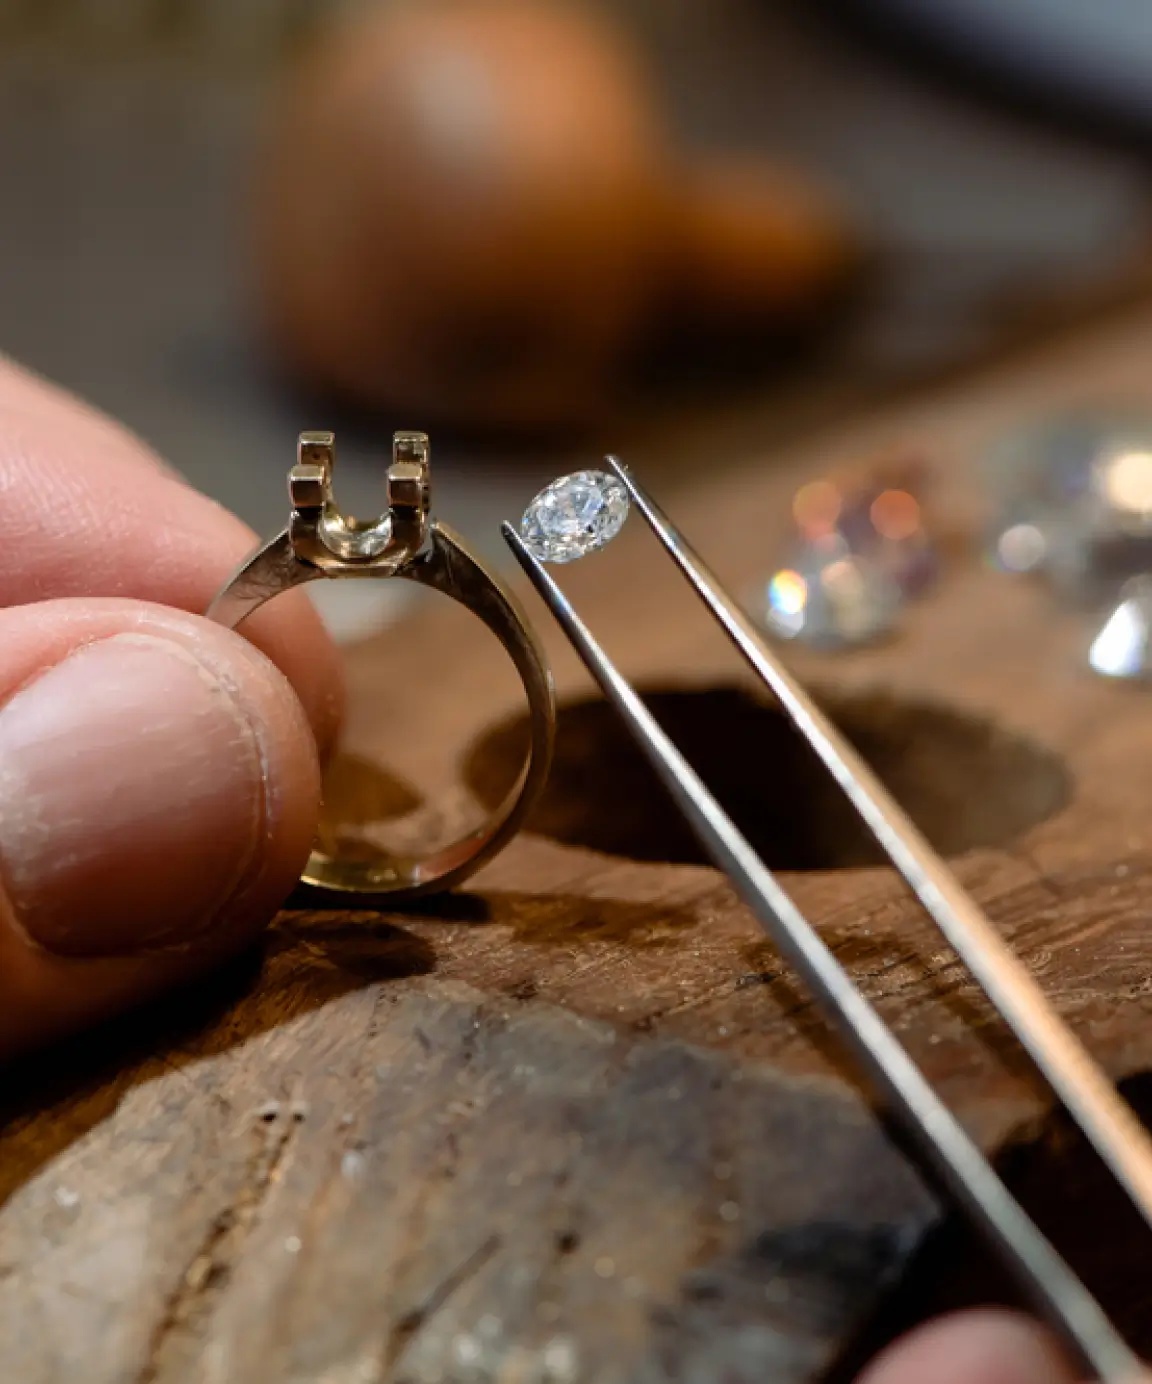 Why Are Diamonds Traditionally Used in Engagement Rings?